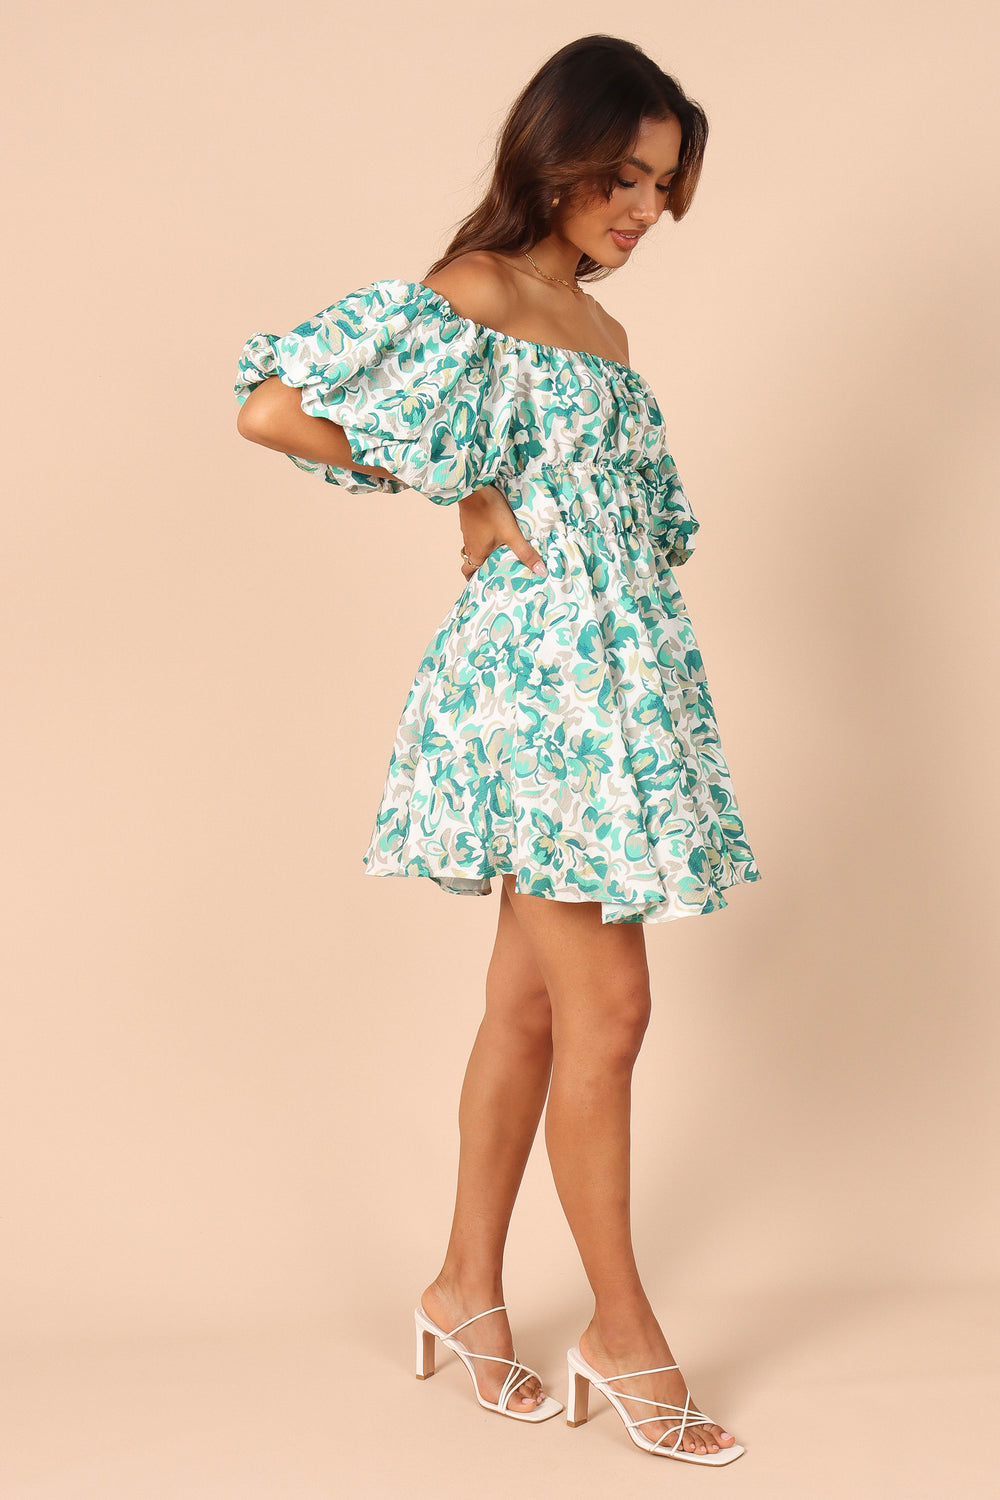 Petal and Pup USA DRESSES Shelly Dress - Blue Floral